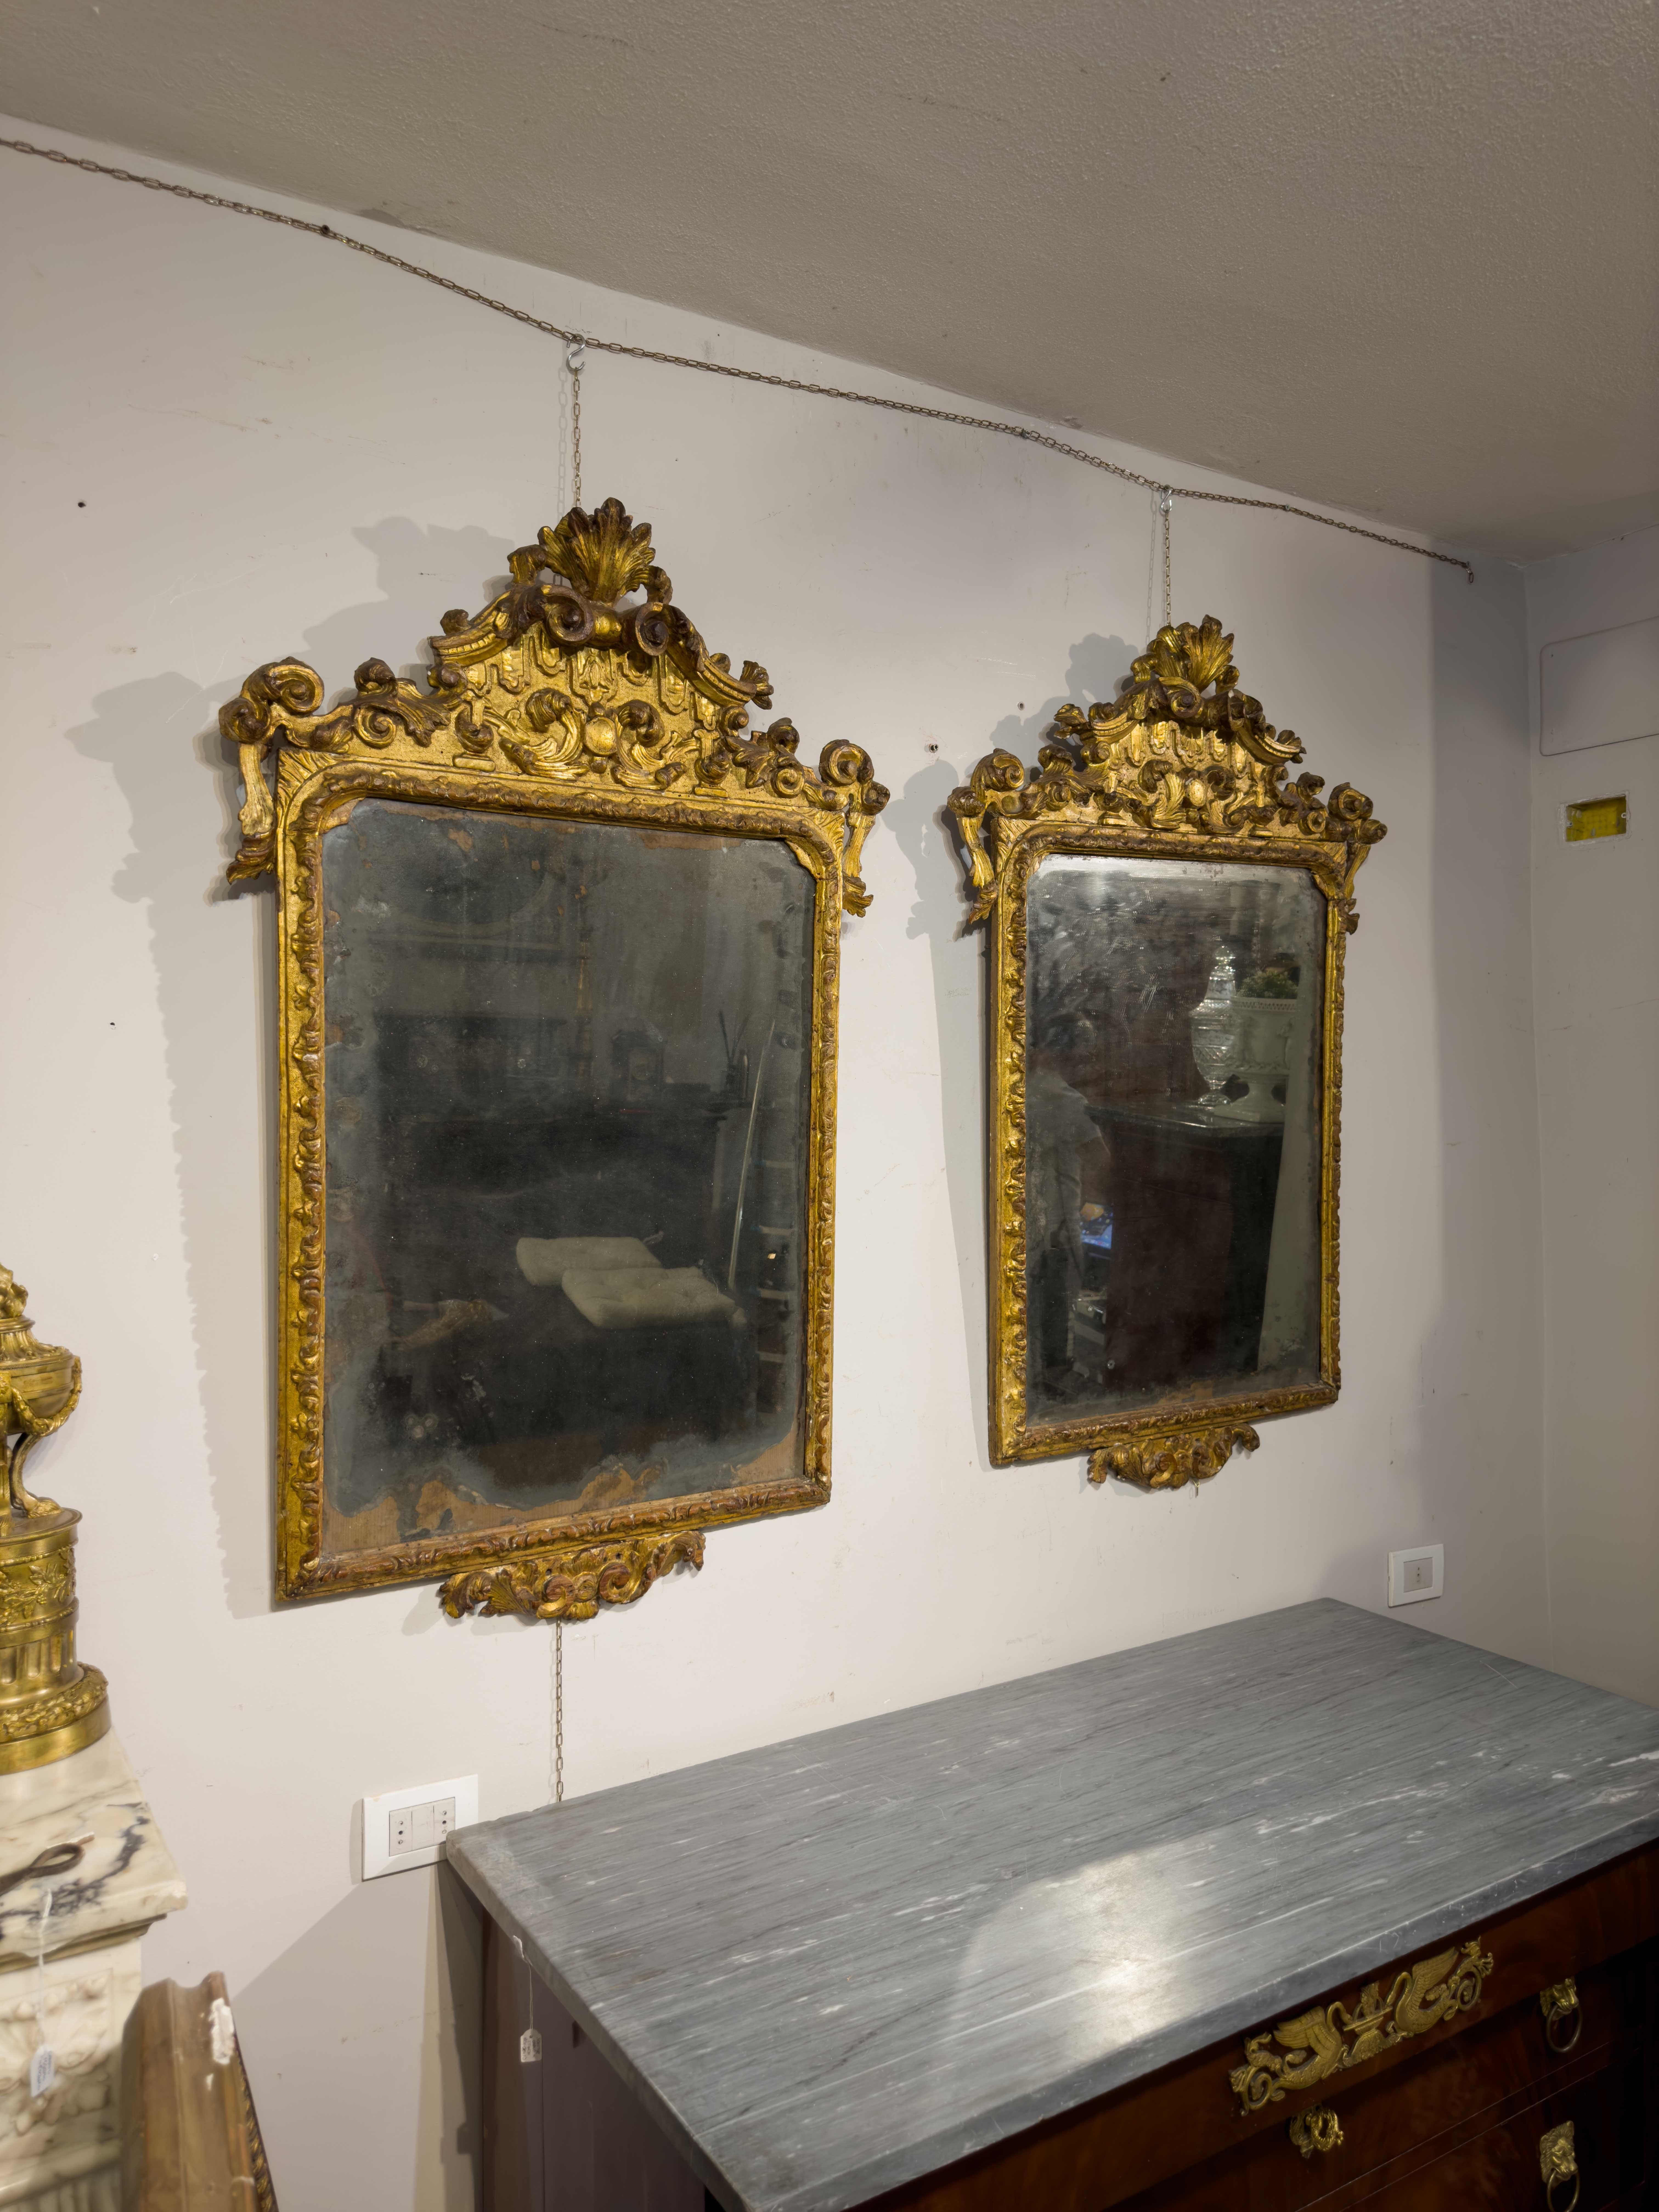 These mirrors in carved and gilded pine wood and made in the Marche region around the first half of the 18th century, represent an elegant expression of the craftsmanship of the time. The carved details reflect the artist's craftsmanship, lending a